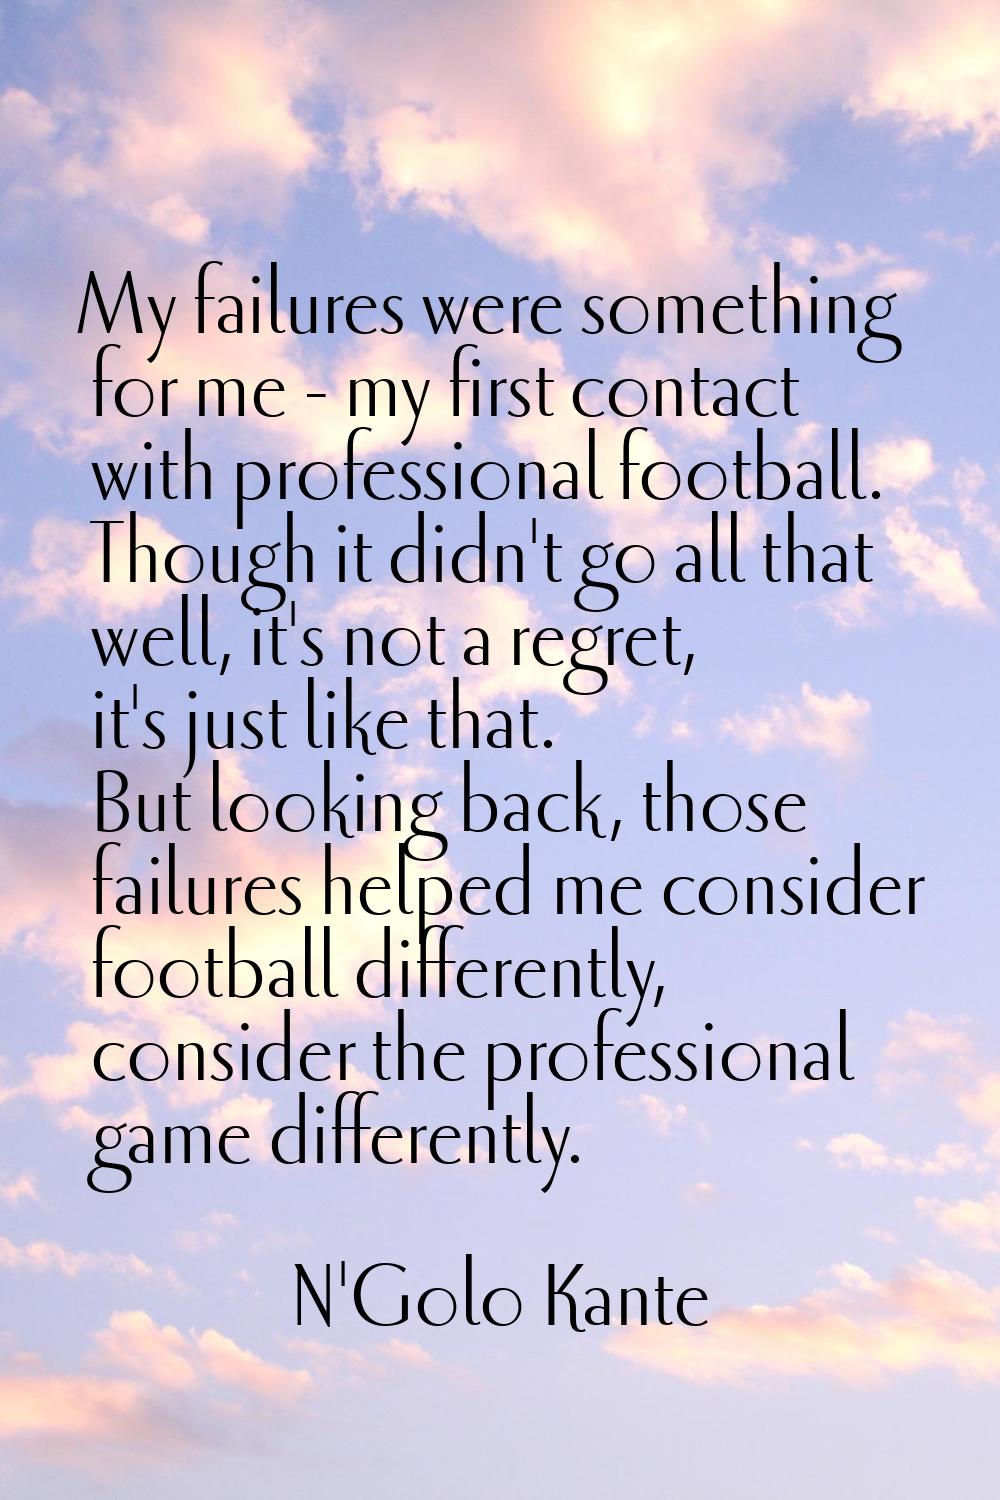 My failures were something for me - my first contact with professional football. Though it didn't g